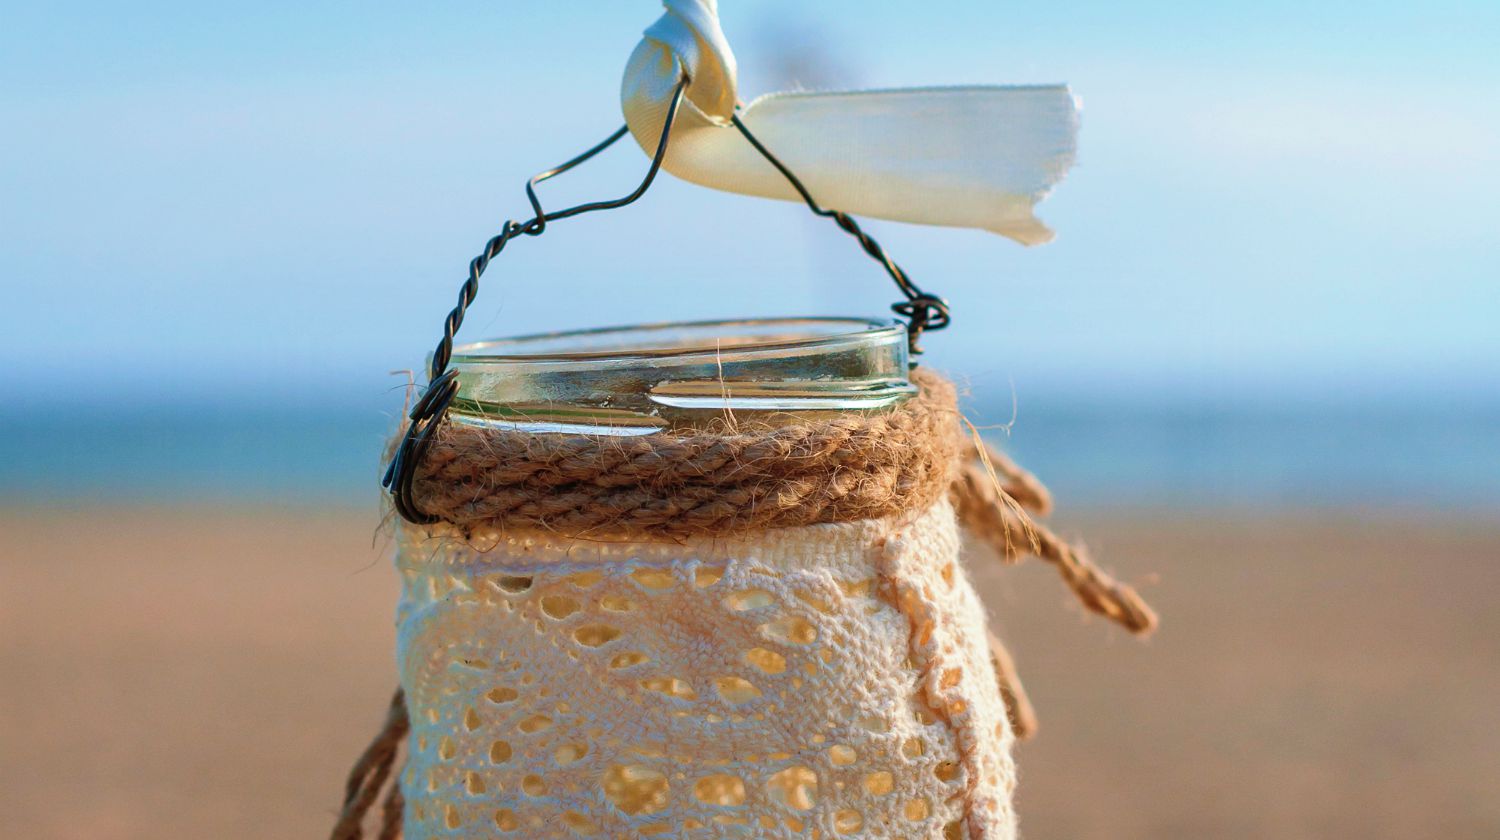 Jar with lace for candle on the beach and sea background | Fun Fall DIY! Make Your Own Rustic Candle Sconces | Featured